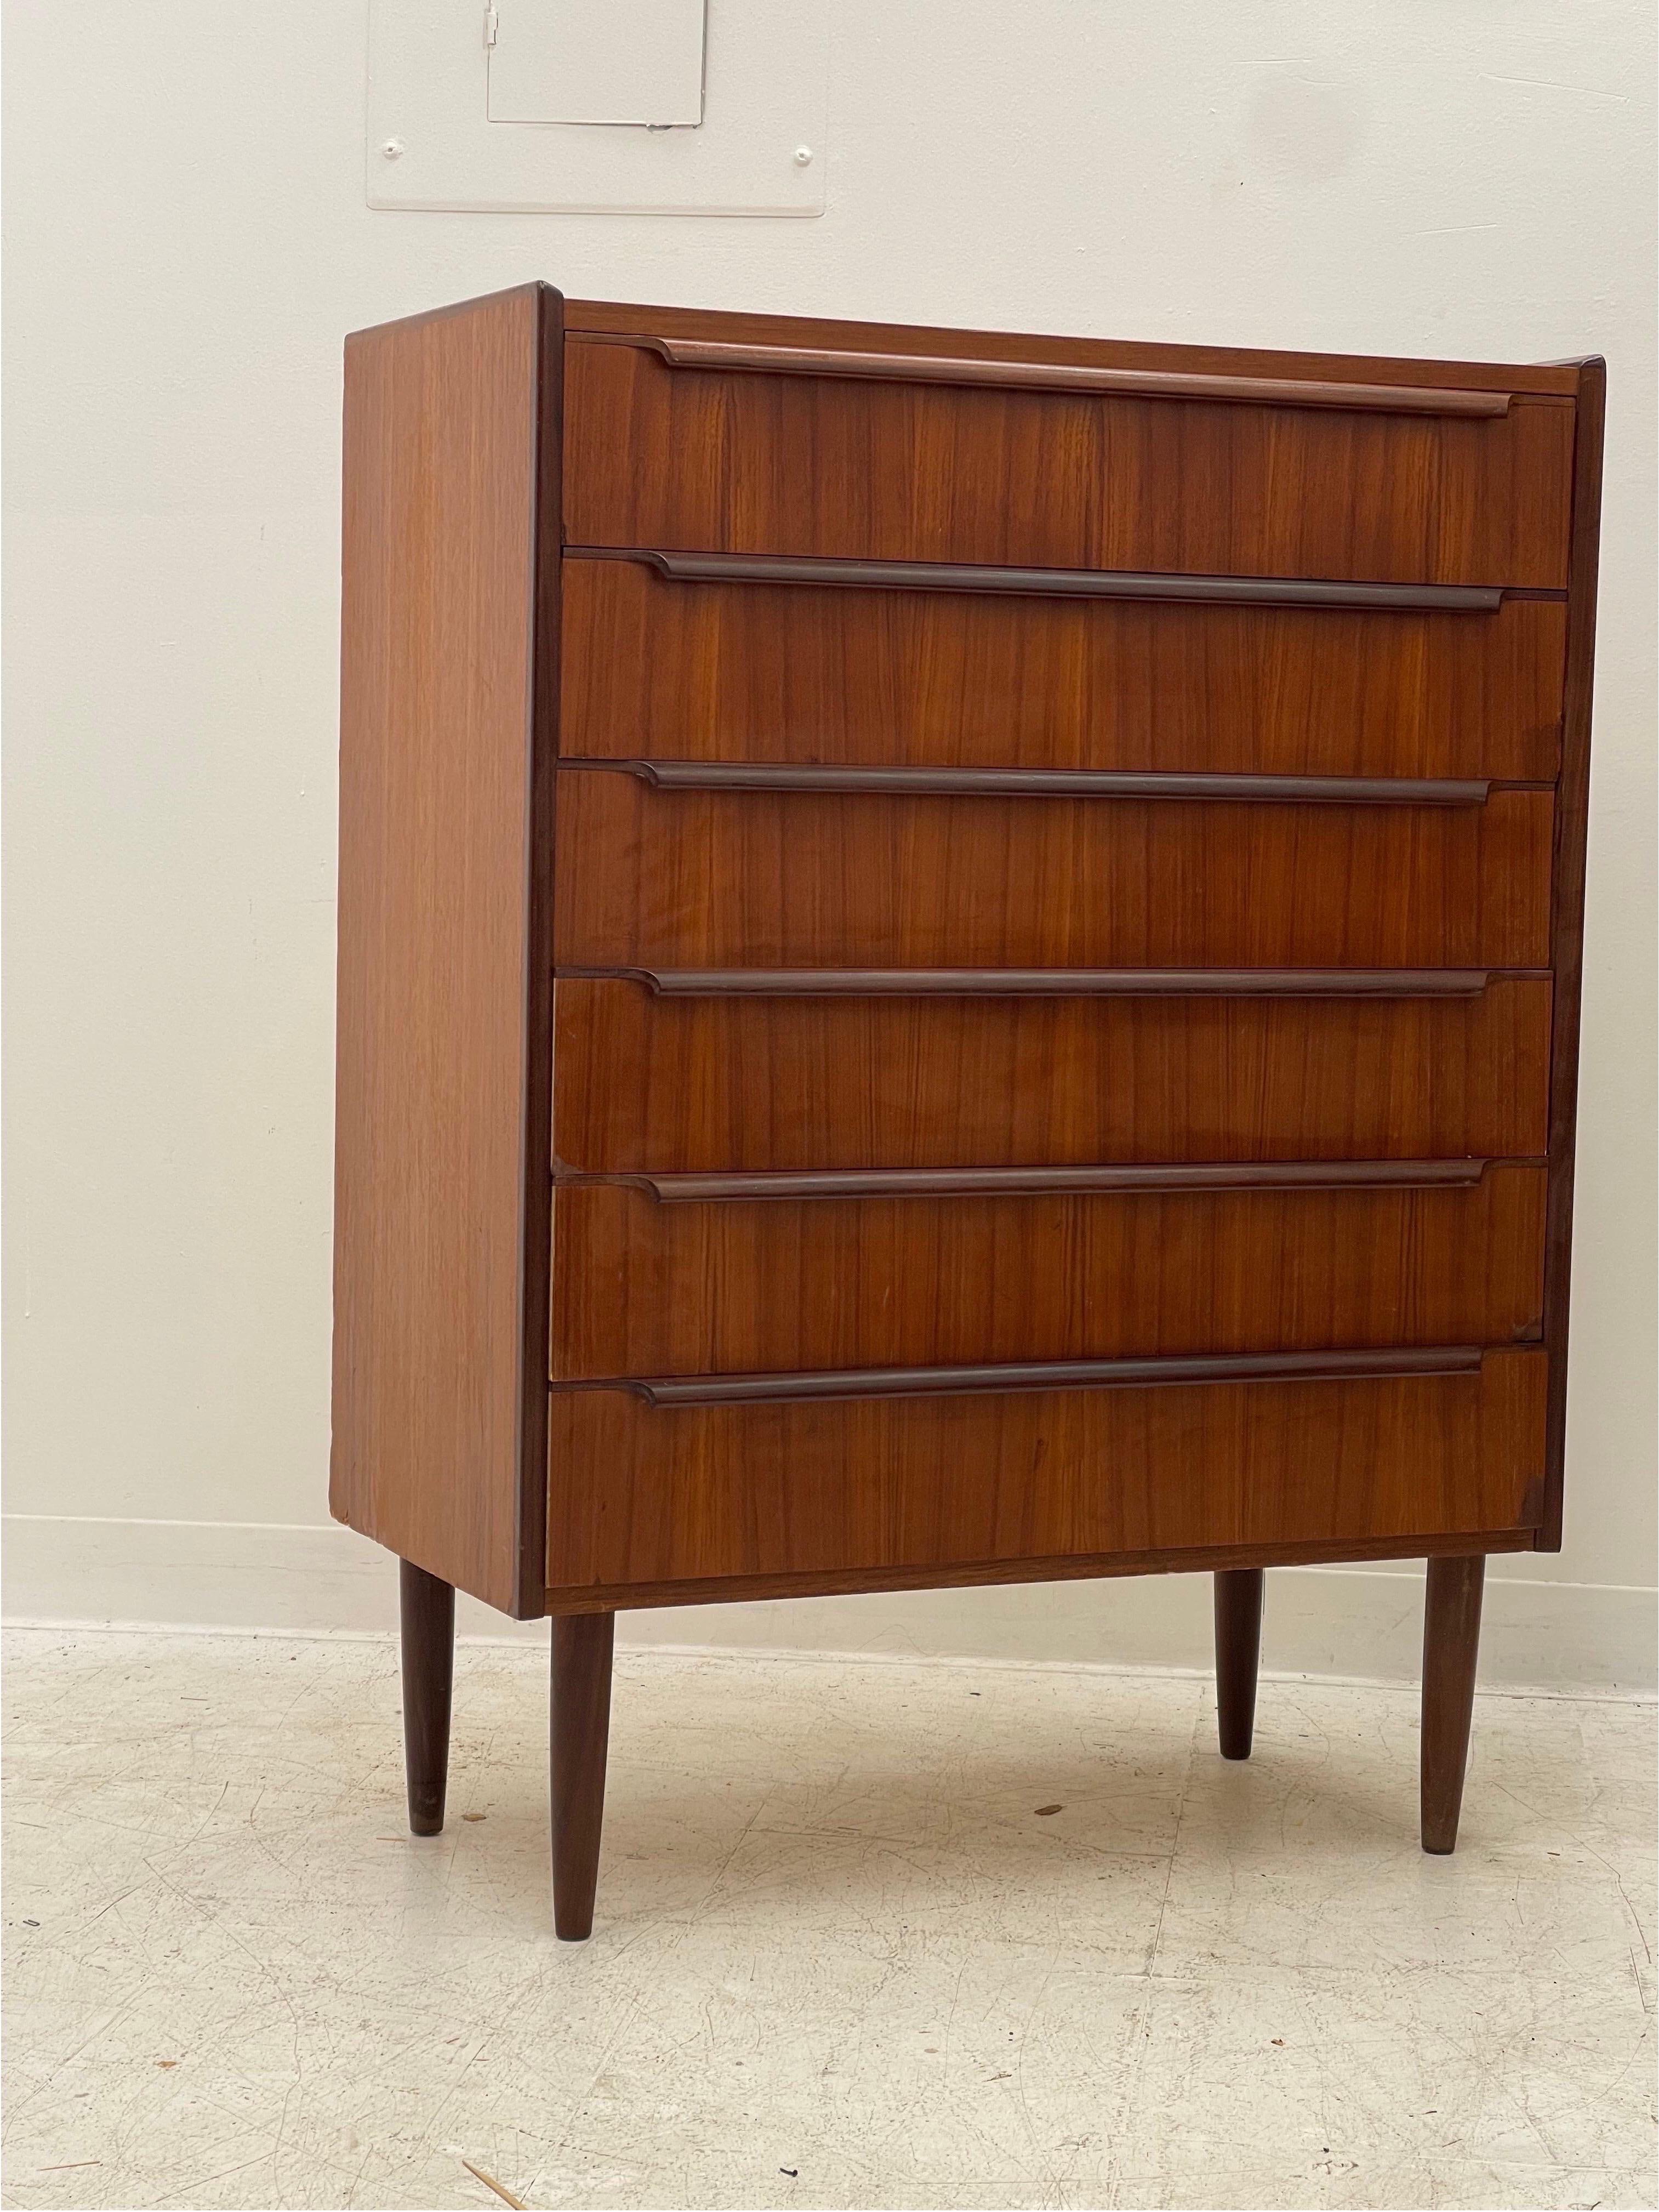 Vintage Danish Mid-Century Modern dresser with dovetailed drawers.

Dimensions 31 W ; 41 1/2 H ; 15 D.